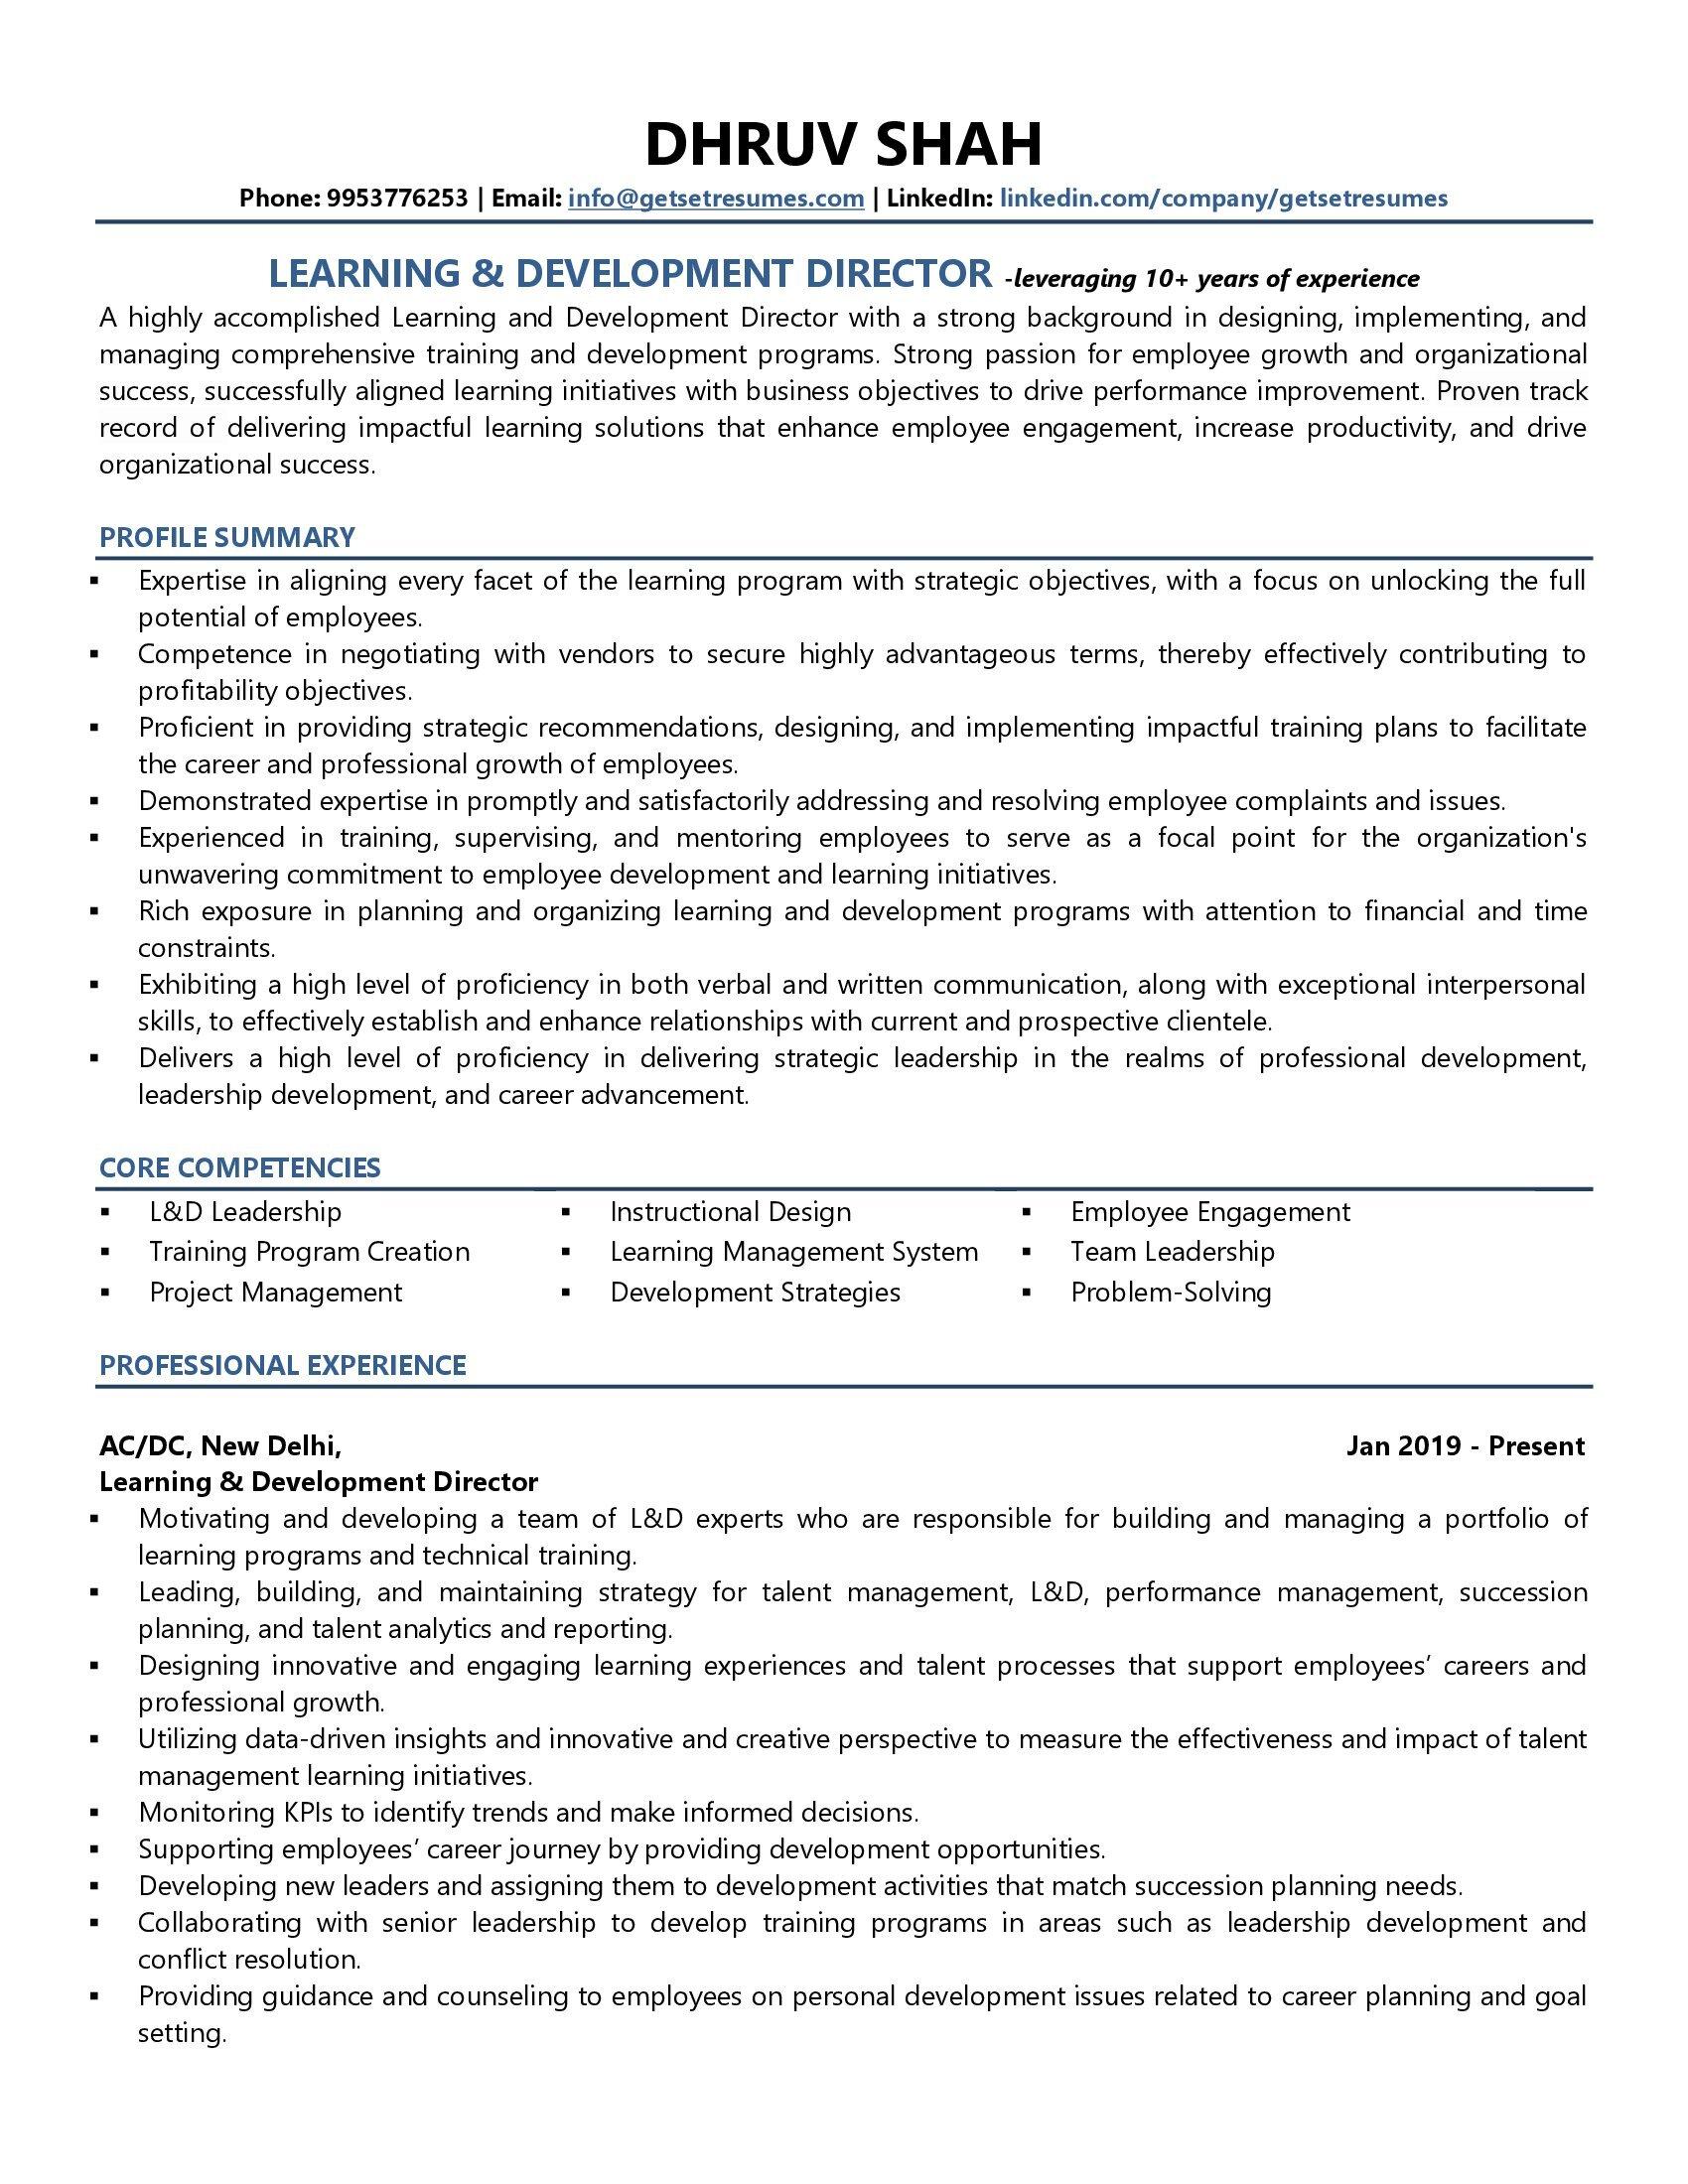 Learning & Development (L&D) Director - Resume Example & Template